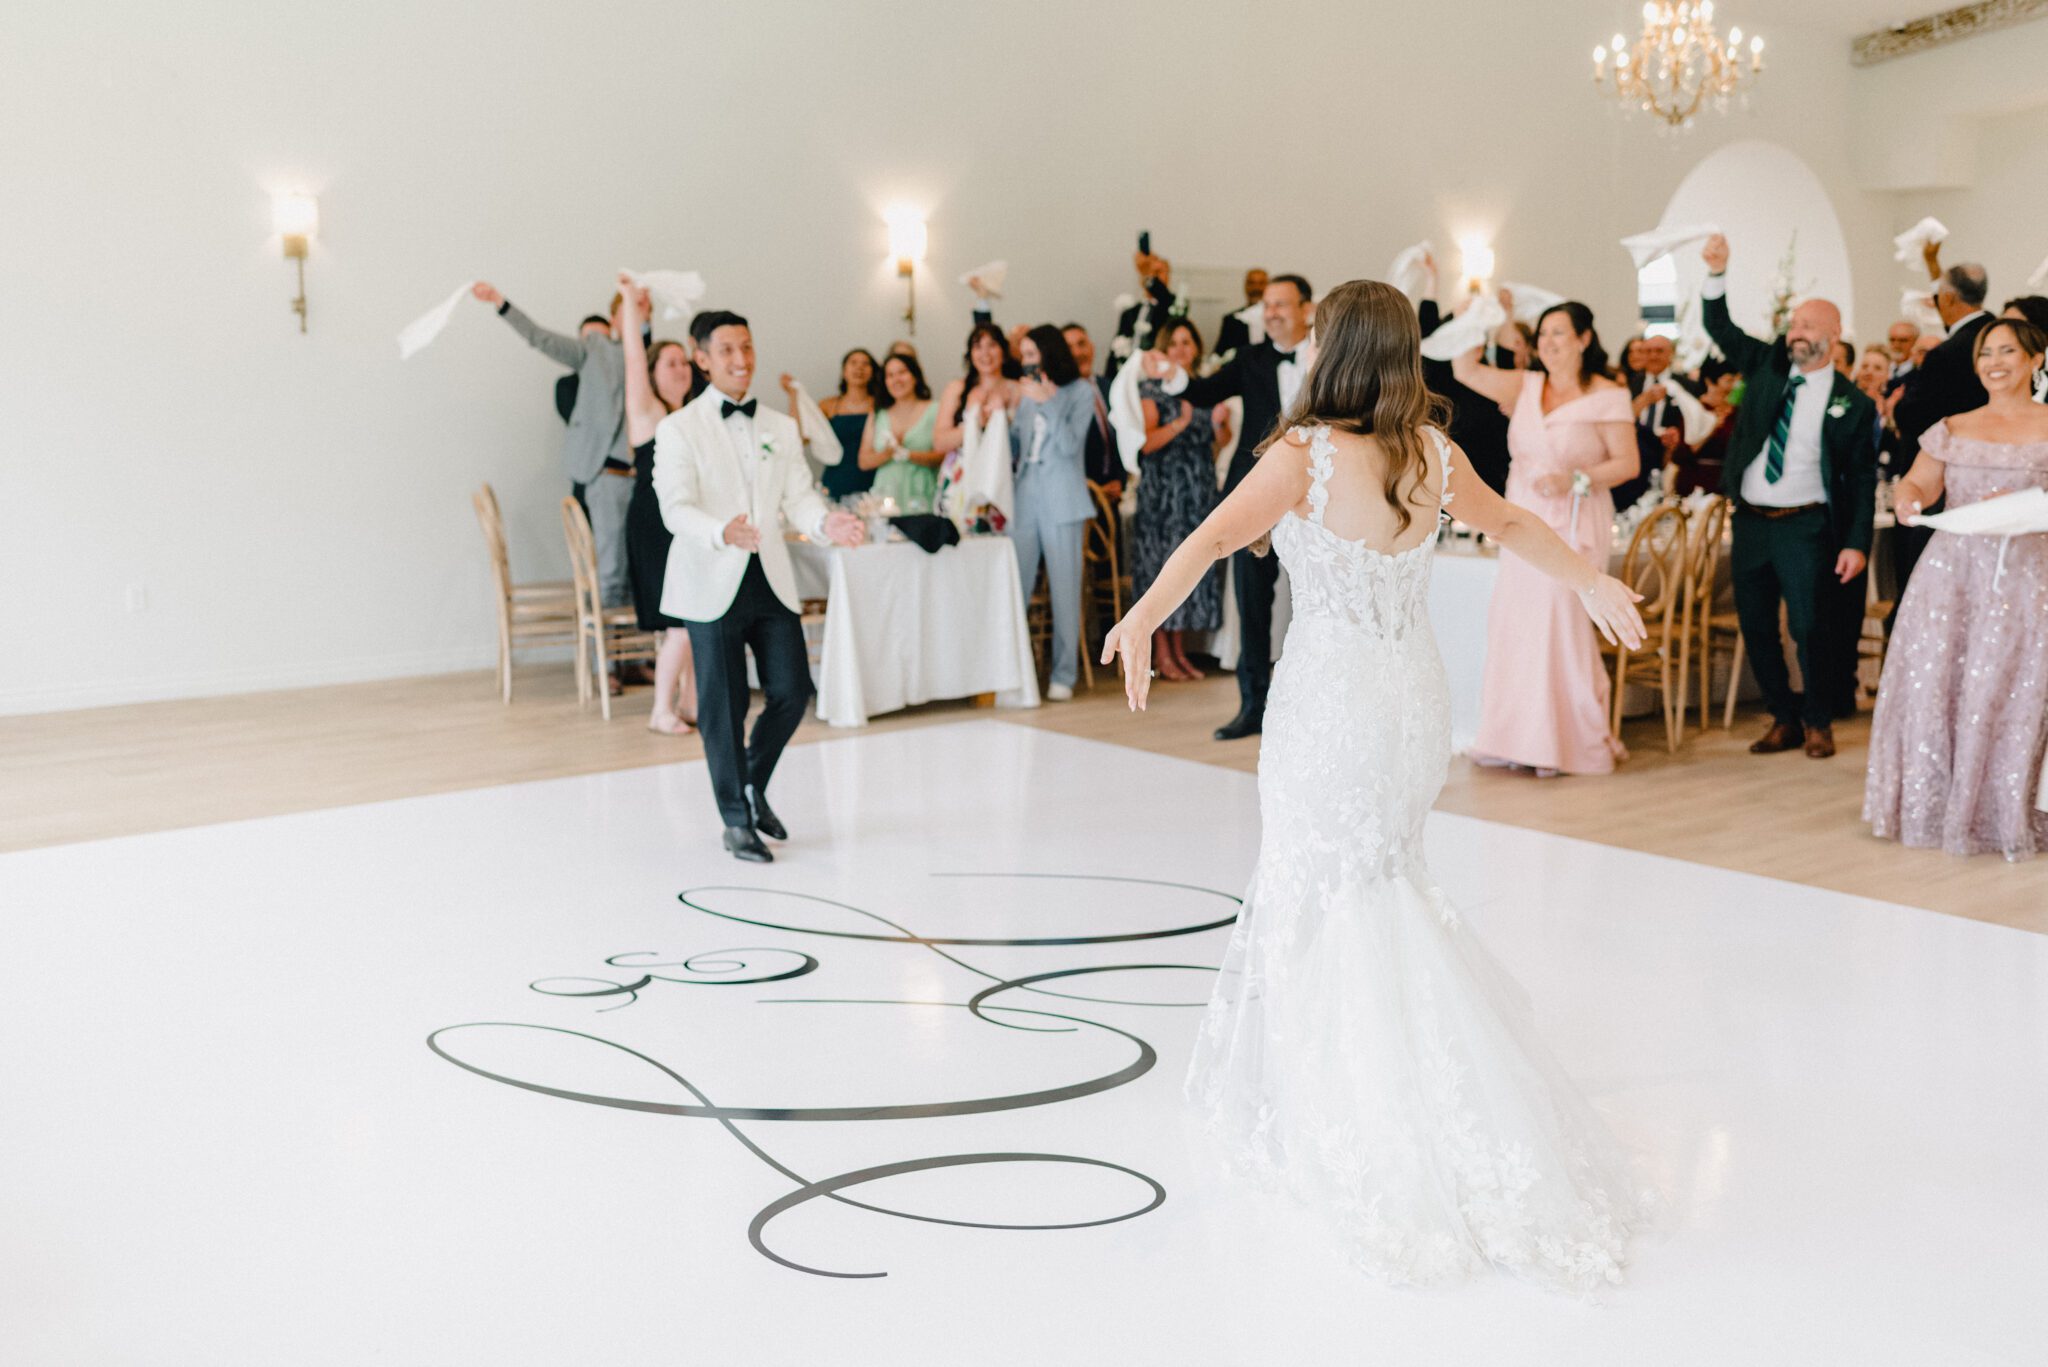 Bride and groom's first dance at wedding reception at Sparrow Lane Events in Alberta. Summer wedding features white roses, greenery blush decor accents and warm wood tones.